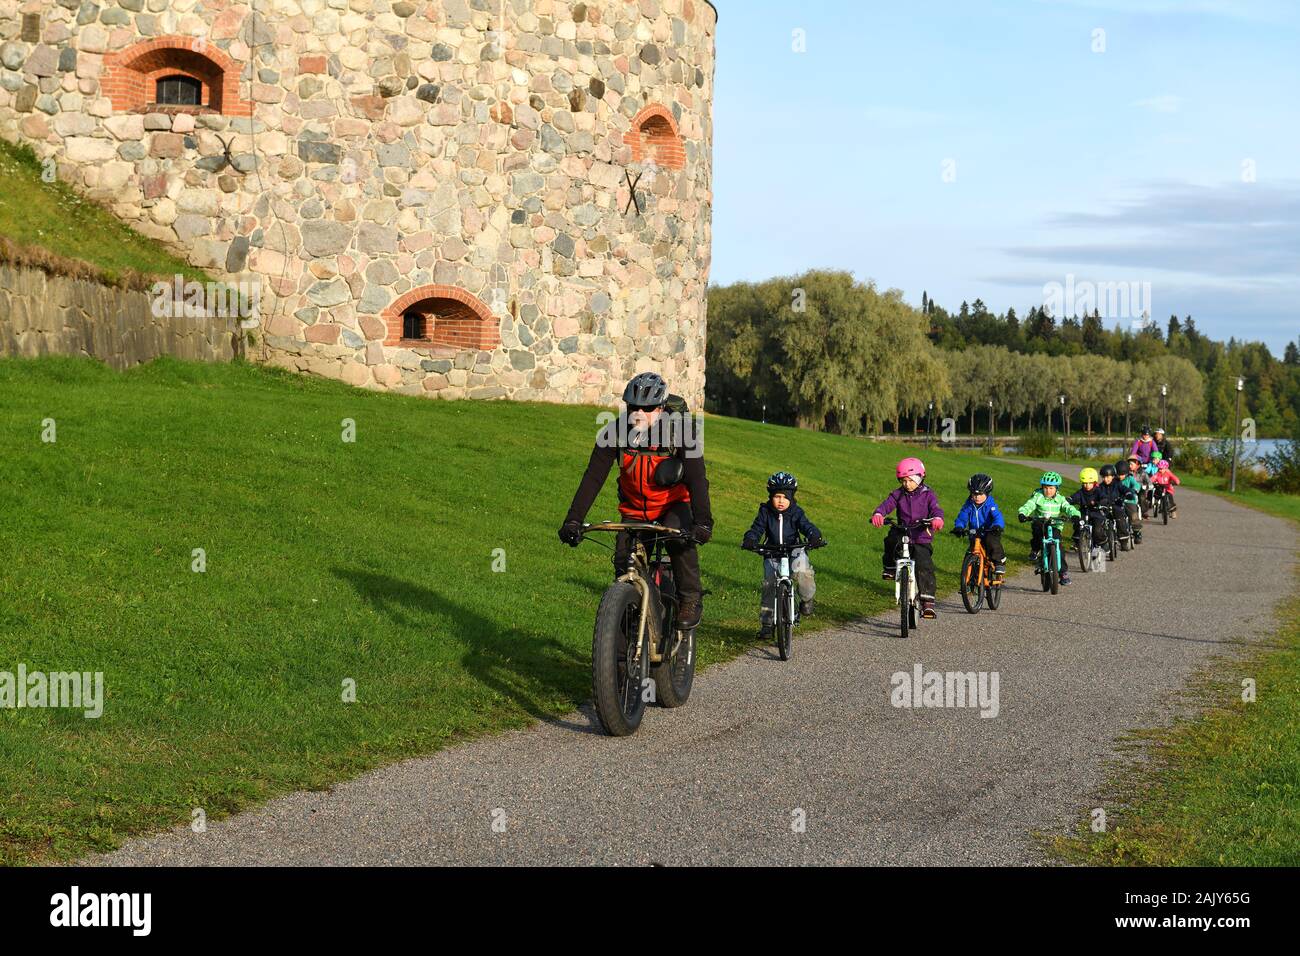 Little kids on bicycles. Excursion in nature. Hameenlinna, Suomi Stock Photo